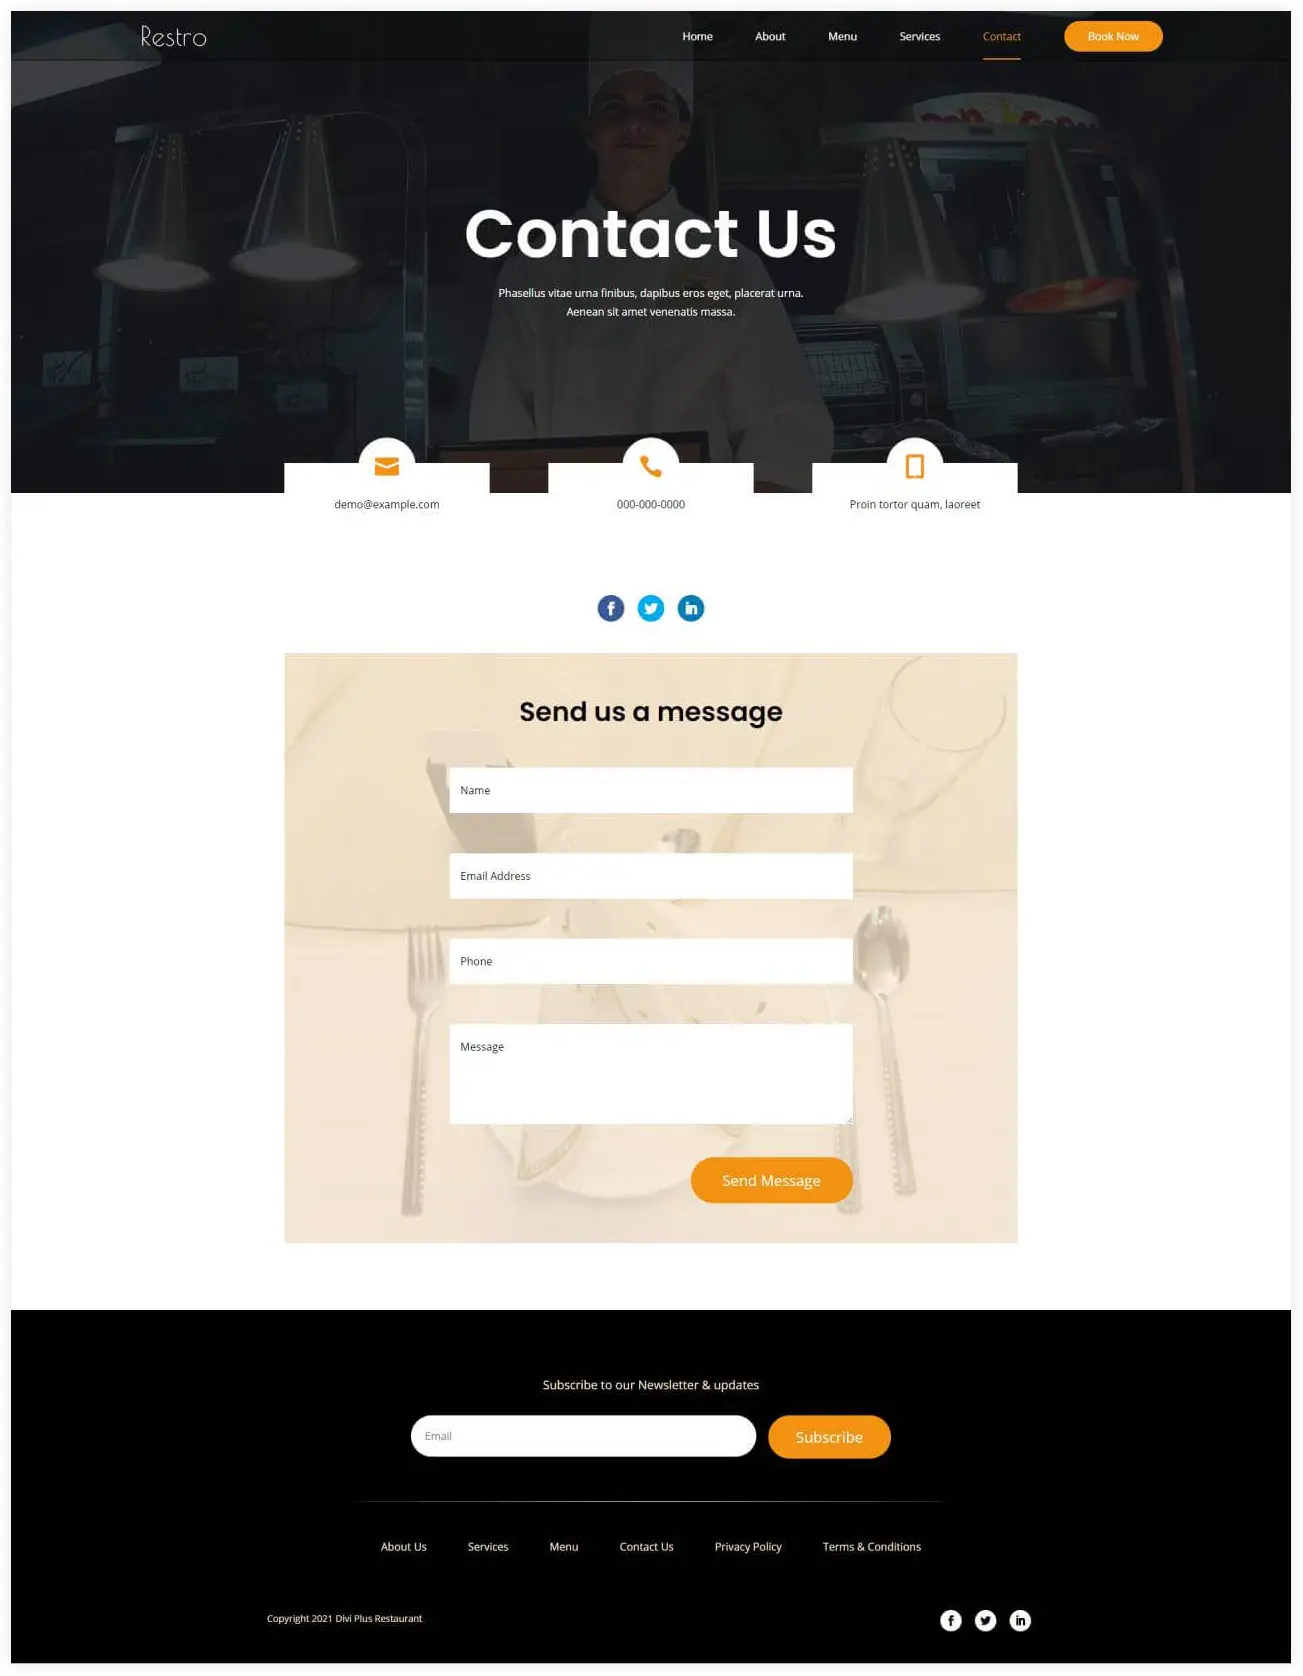 Restaurant contact page layout